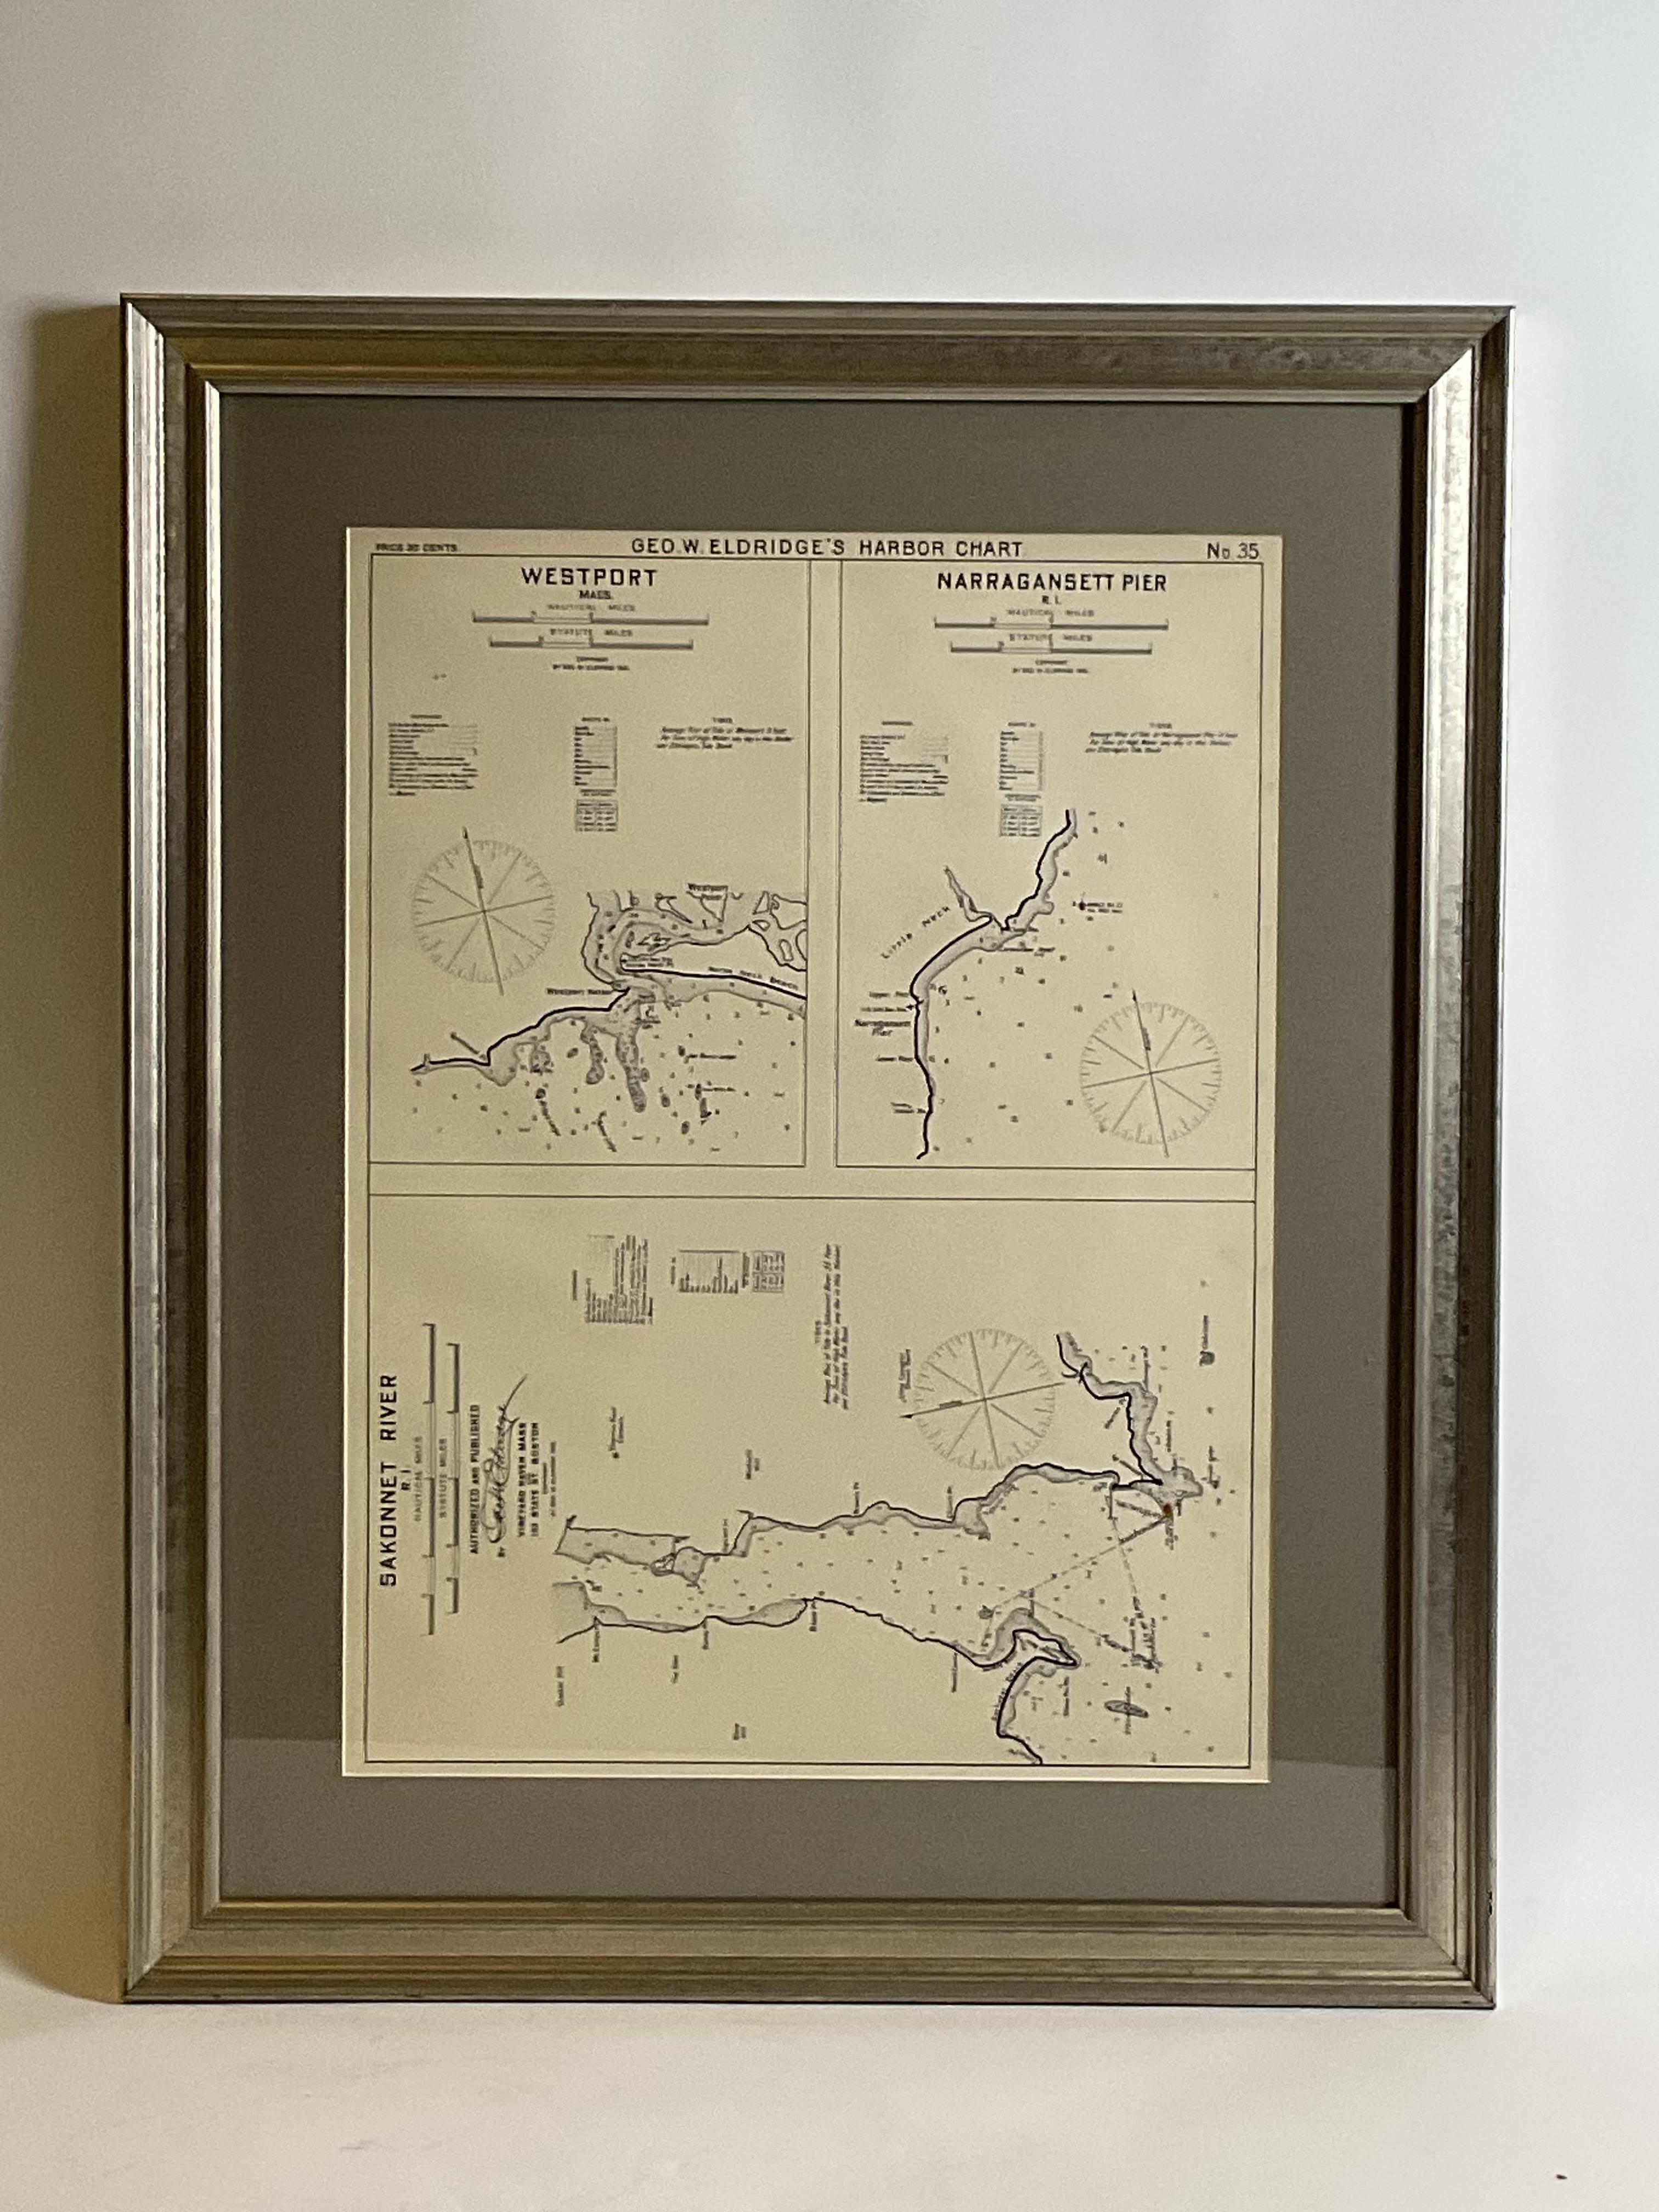 Early 20th Century Mariners Chart of Westport Mass and Narraganset Pier by George Eldridge 1901 For Sale